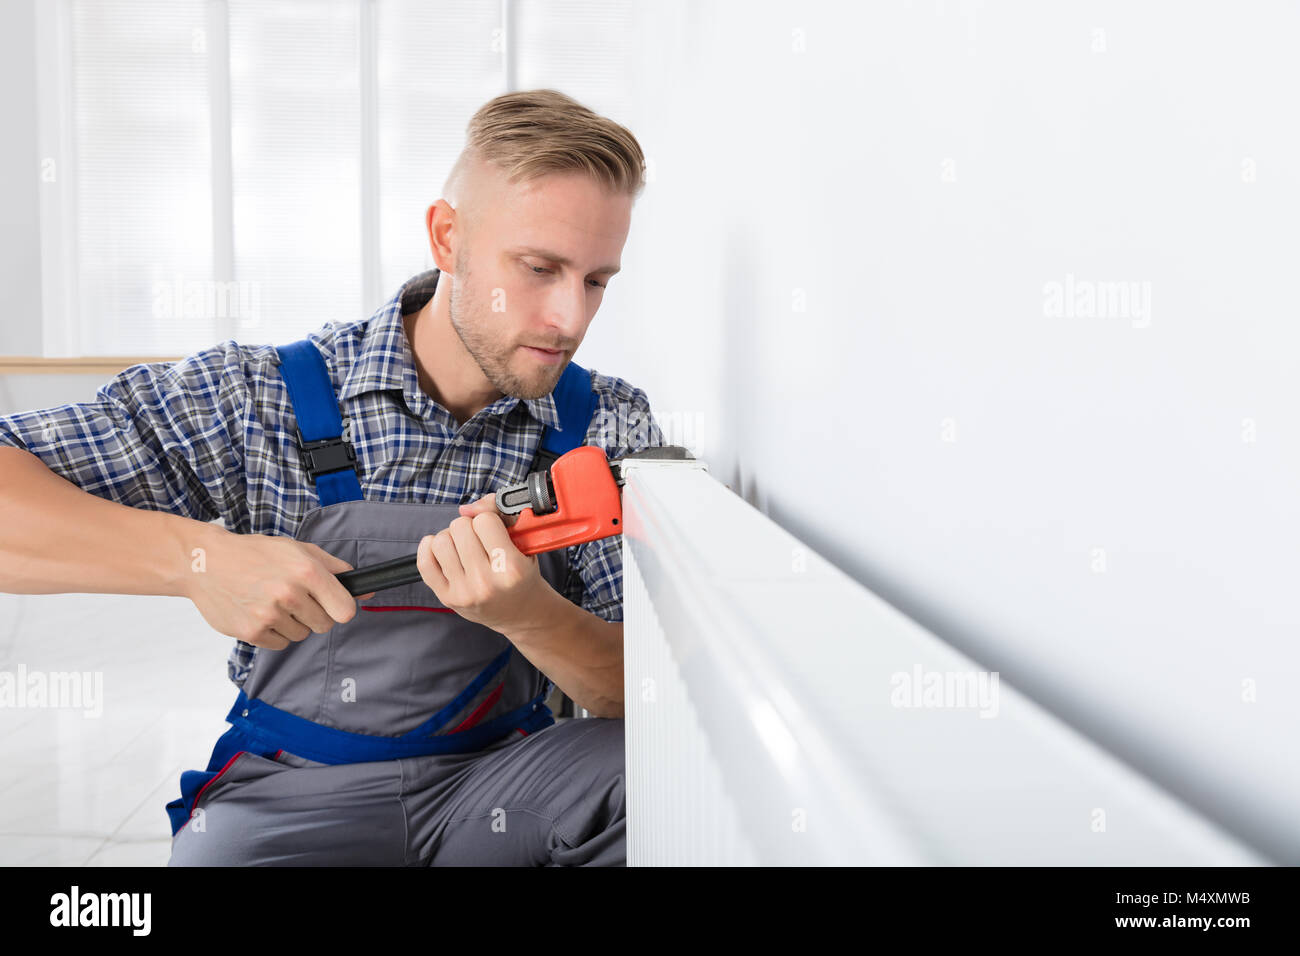 Close-up Of Male Plumber Fixing Thermostat Using Wrench At Home Stock Photo